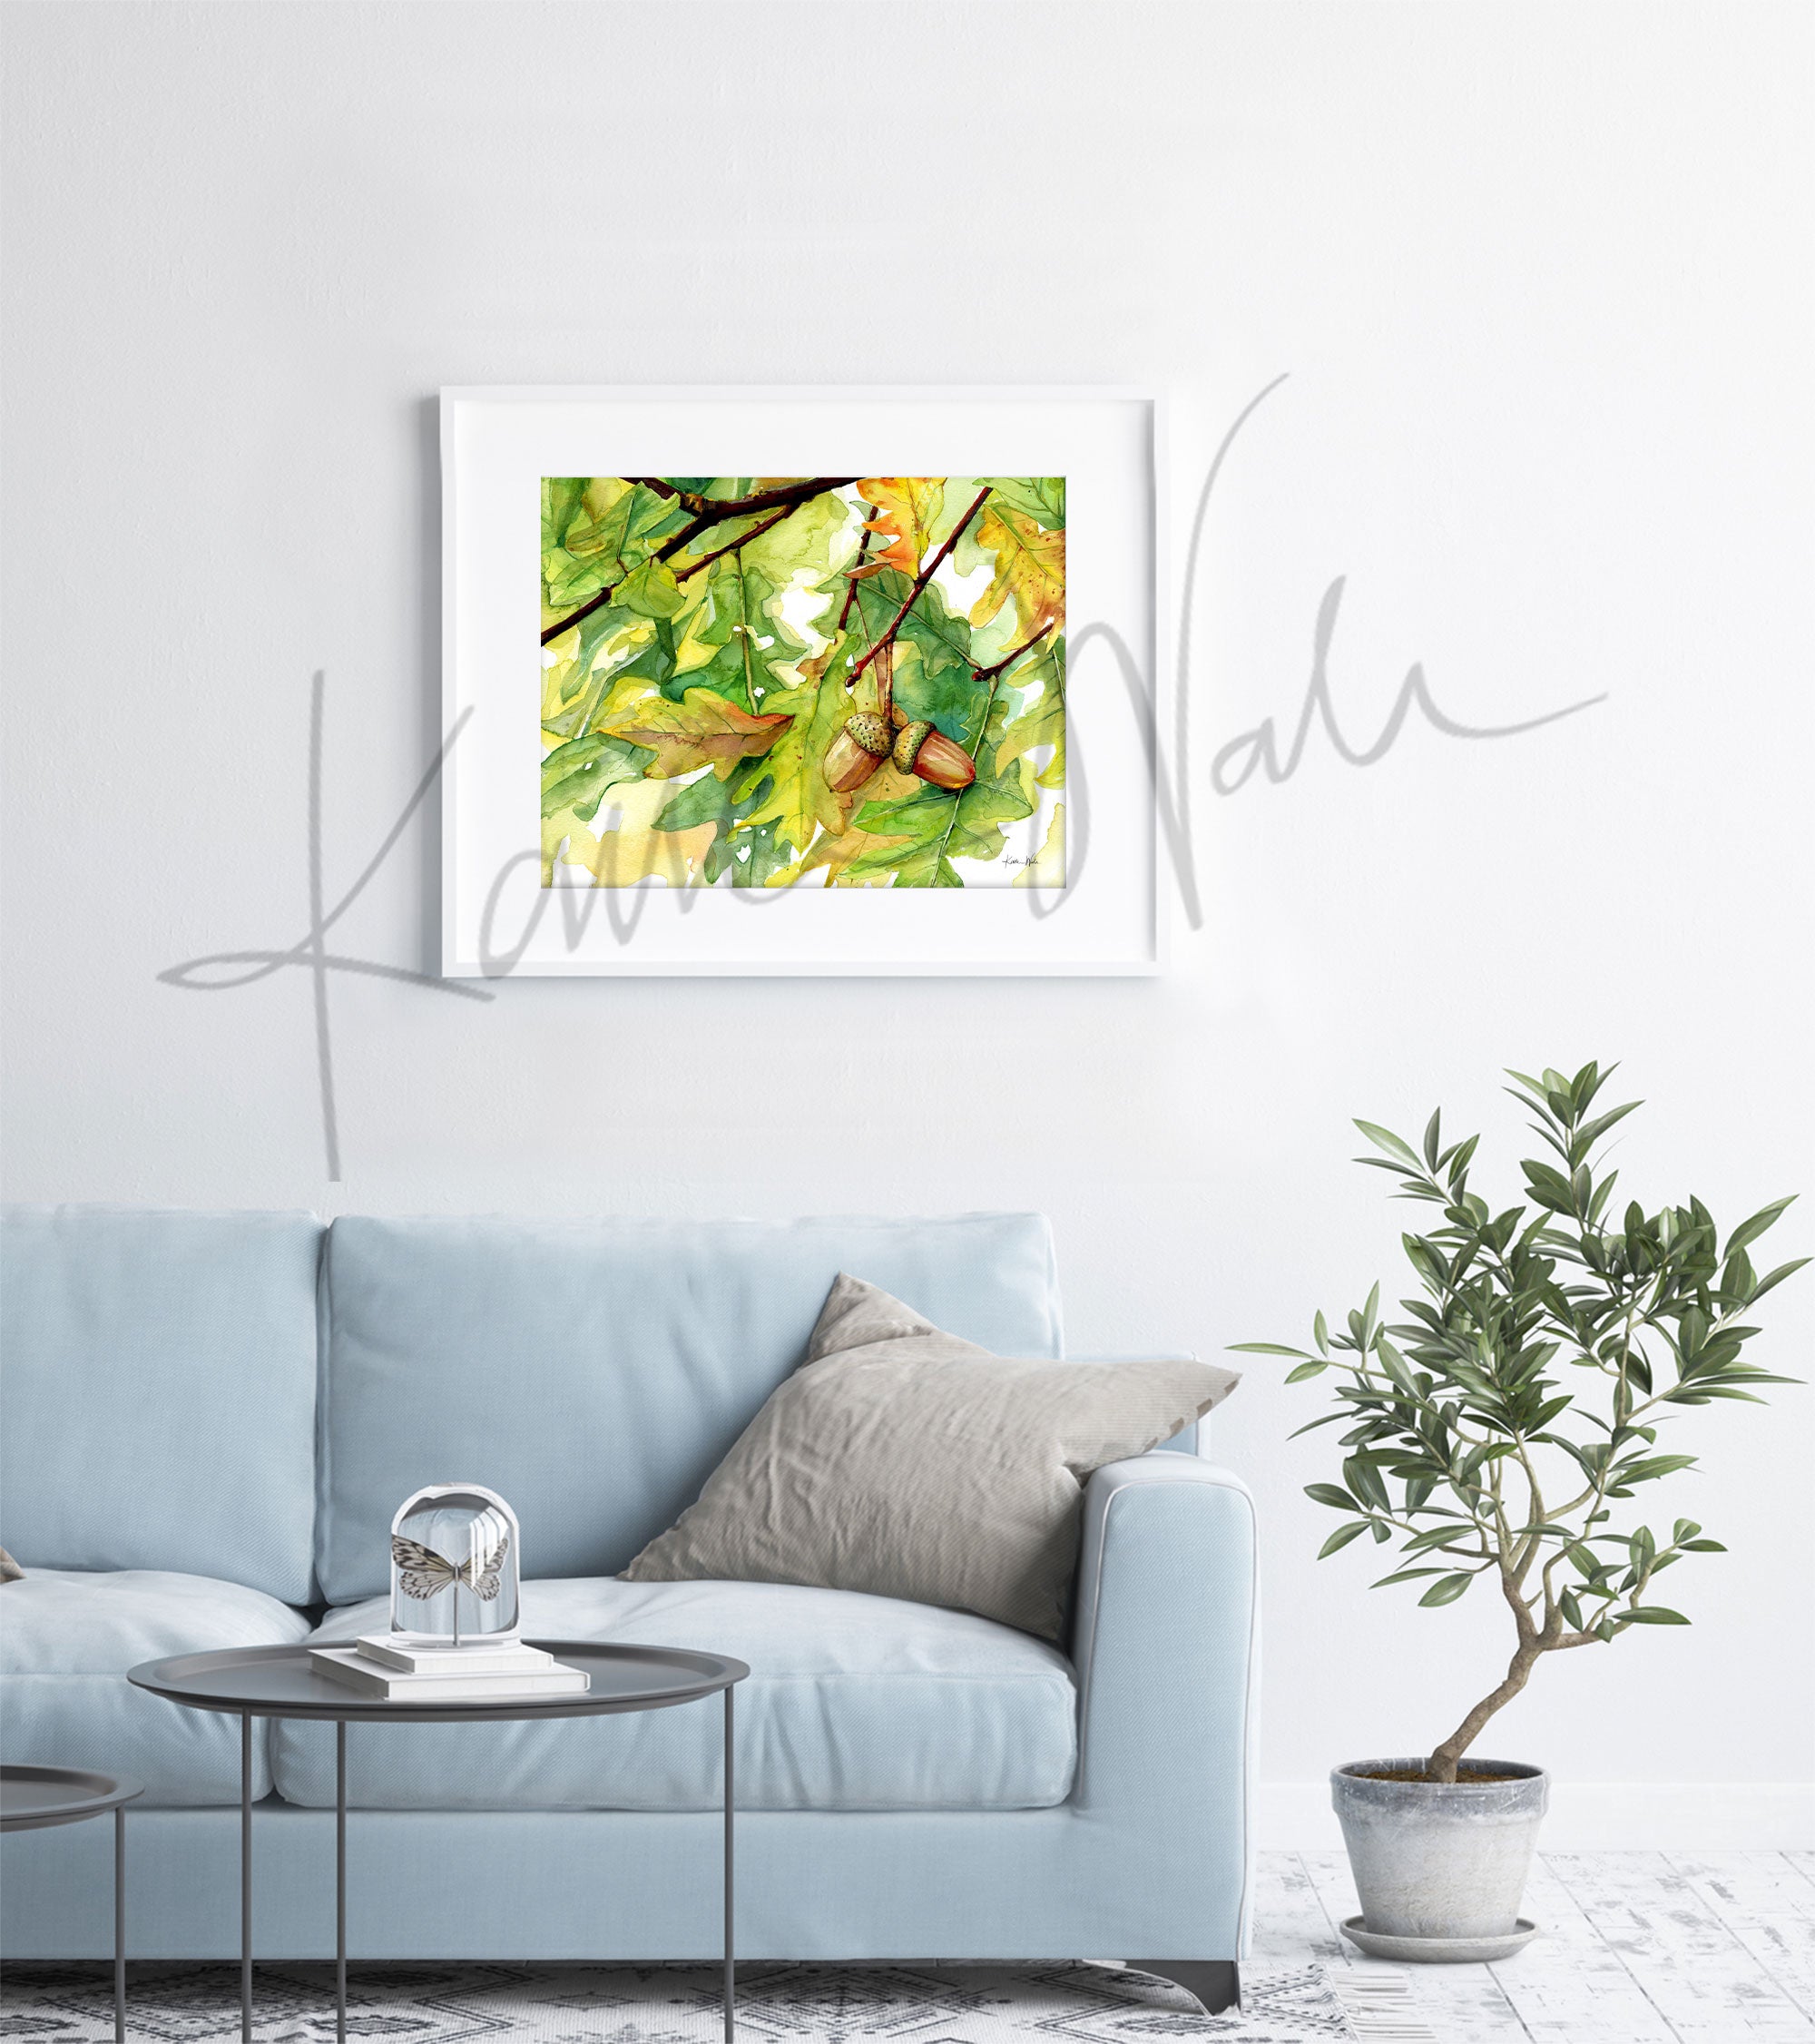 Framed watercolor painting of autumn leaves and acorns hanging from an oak tree. The painting is hanging over a blue couch.